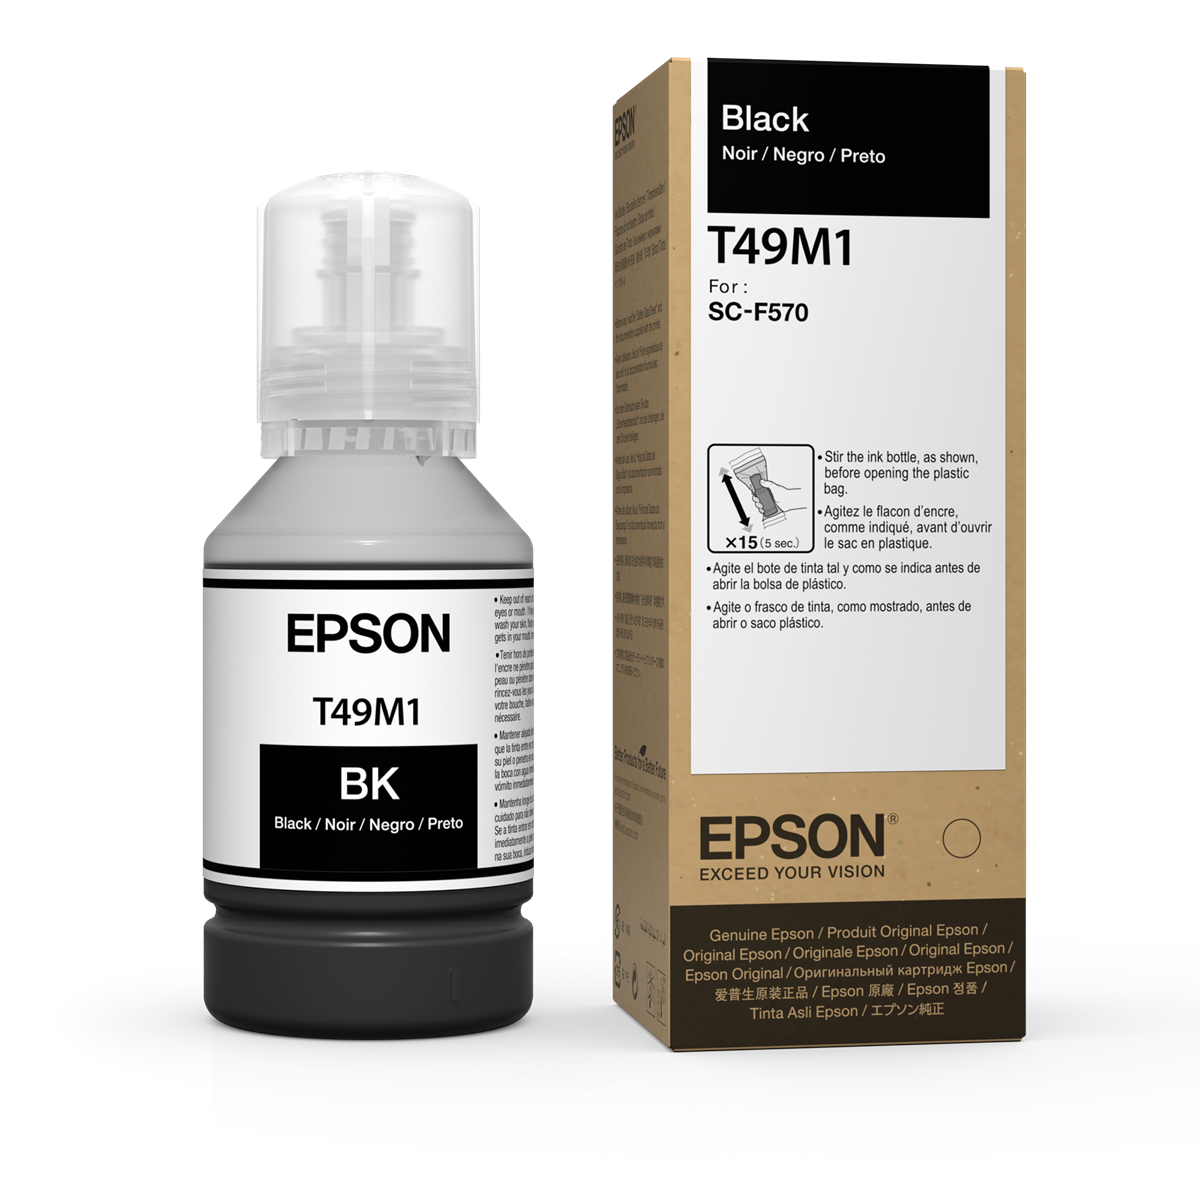 Epson T49M Dye-Sublimation Ink Series